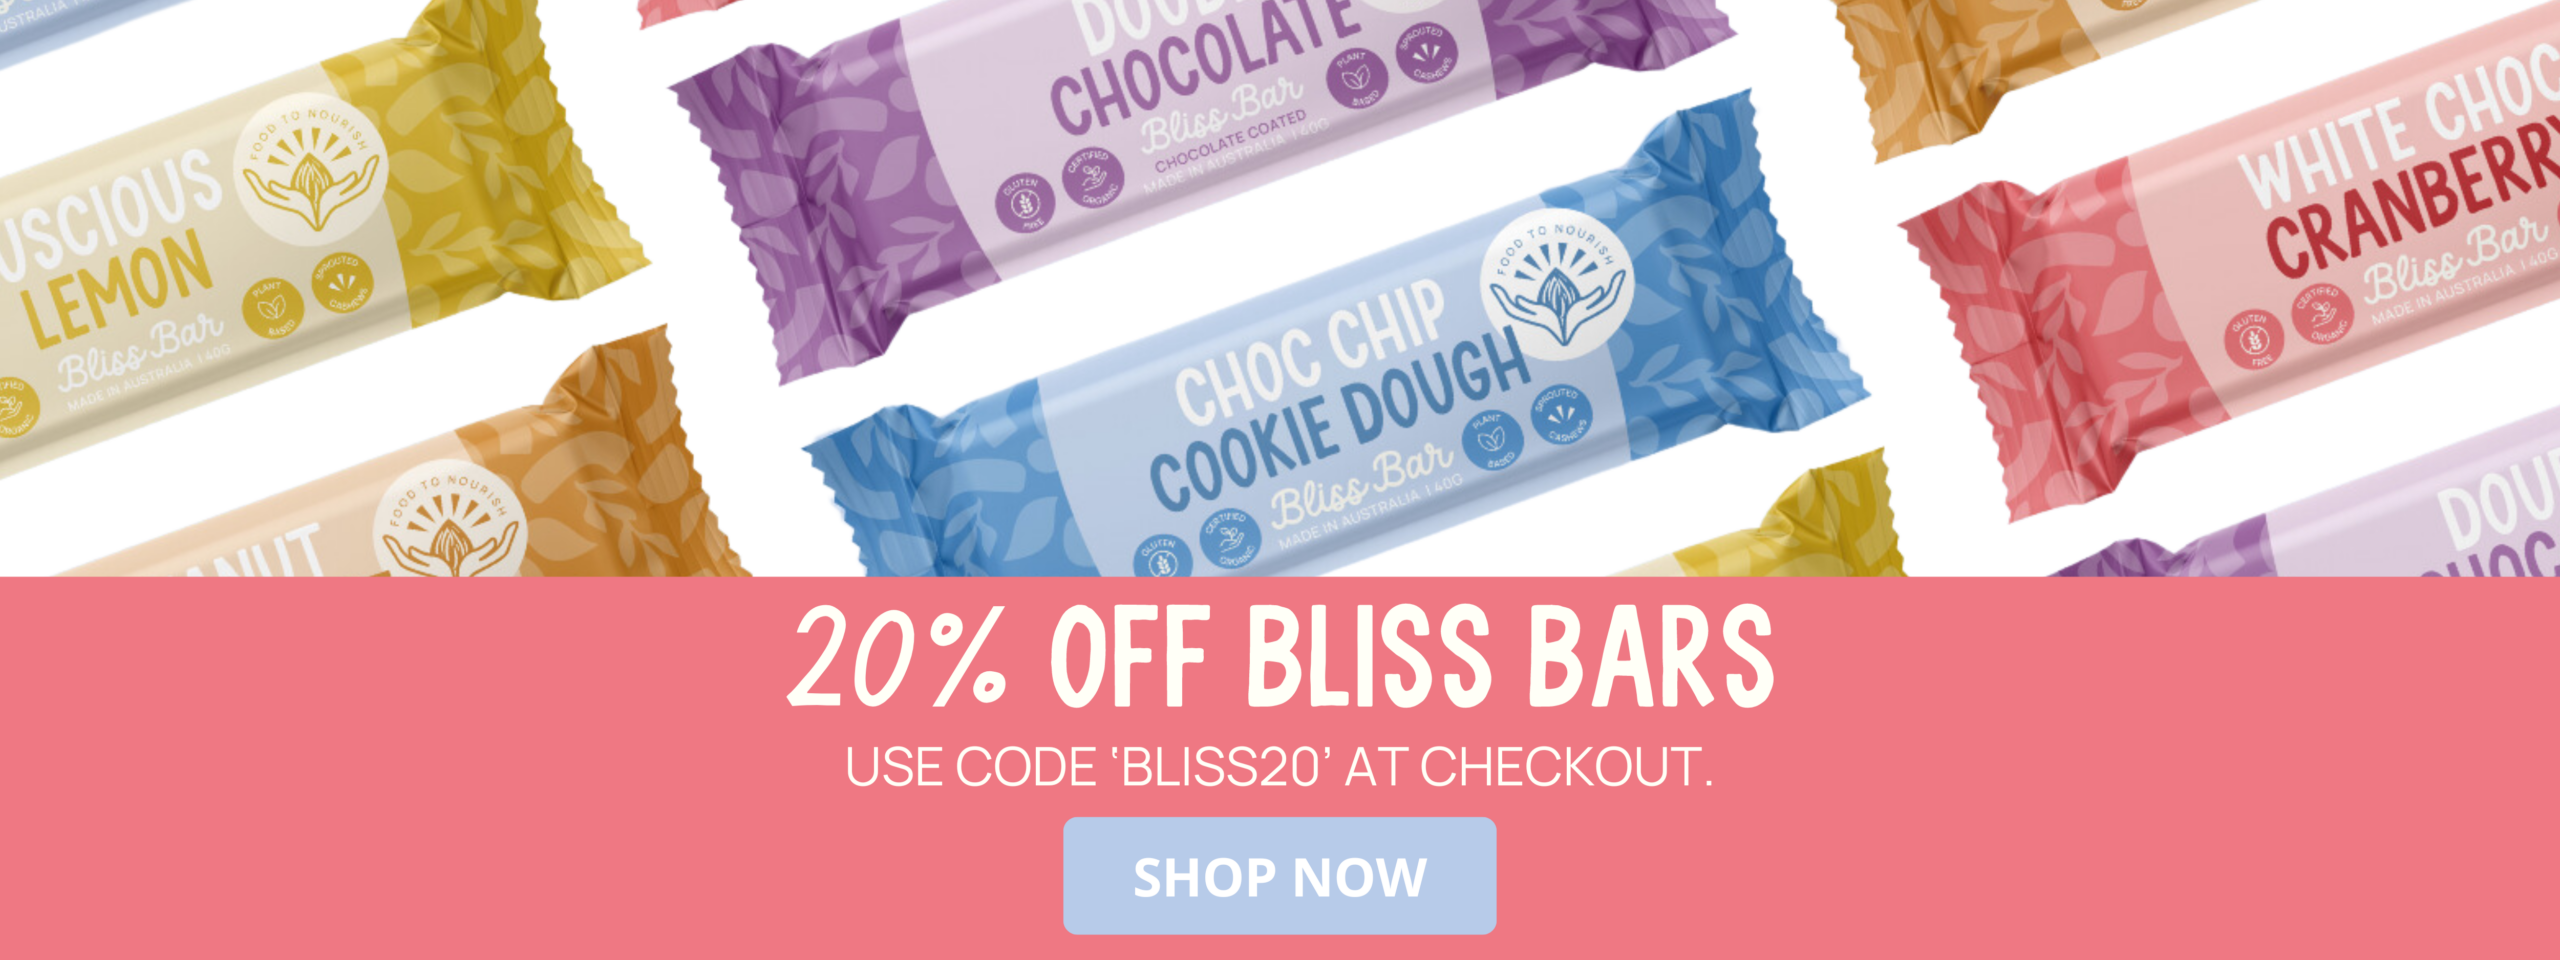 Bliss Bars Sale 20% off